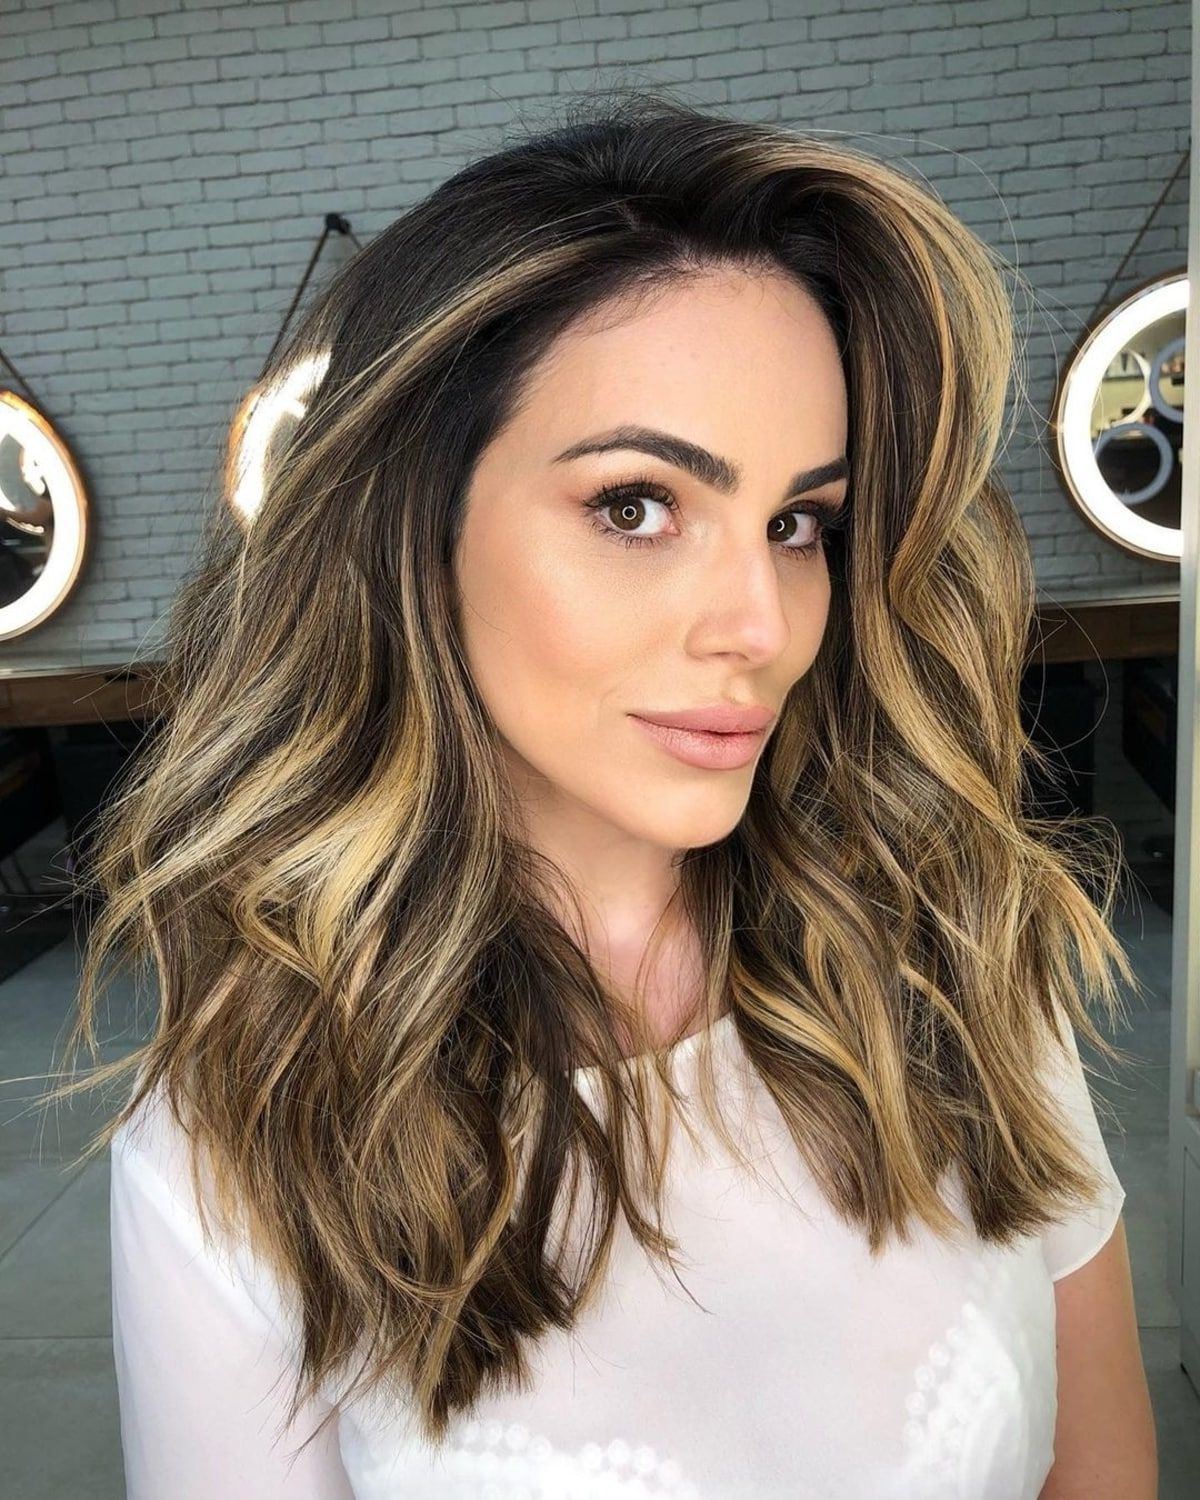 53 Best Medium Length Hairstyles For Thick Hair To Feel Lighter Throughout 2018 Shoulder Length Haircuts For Thick Hair (View 20 of 20)